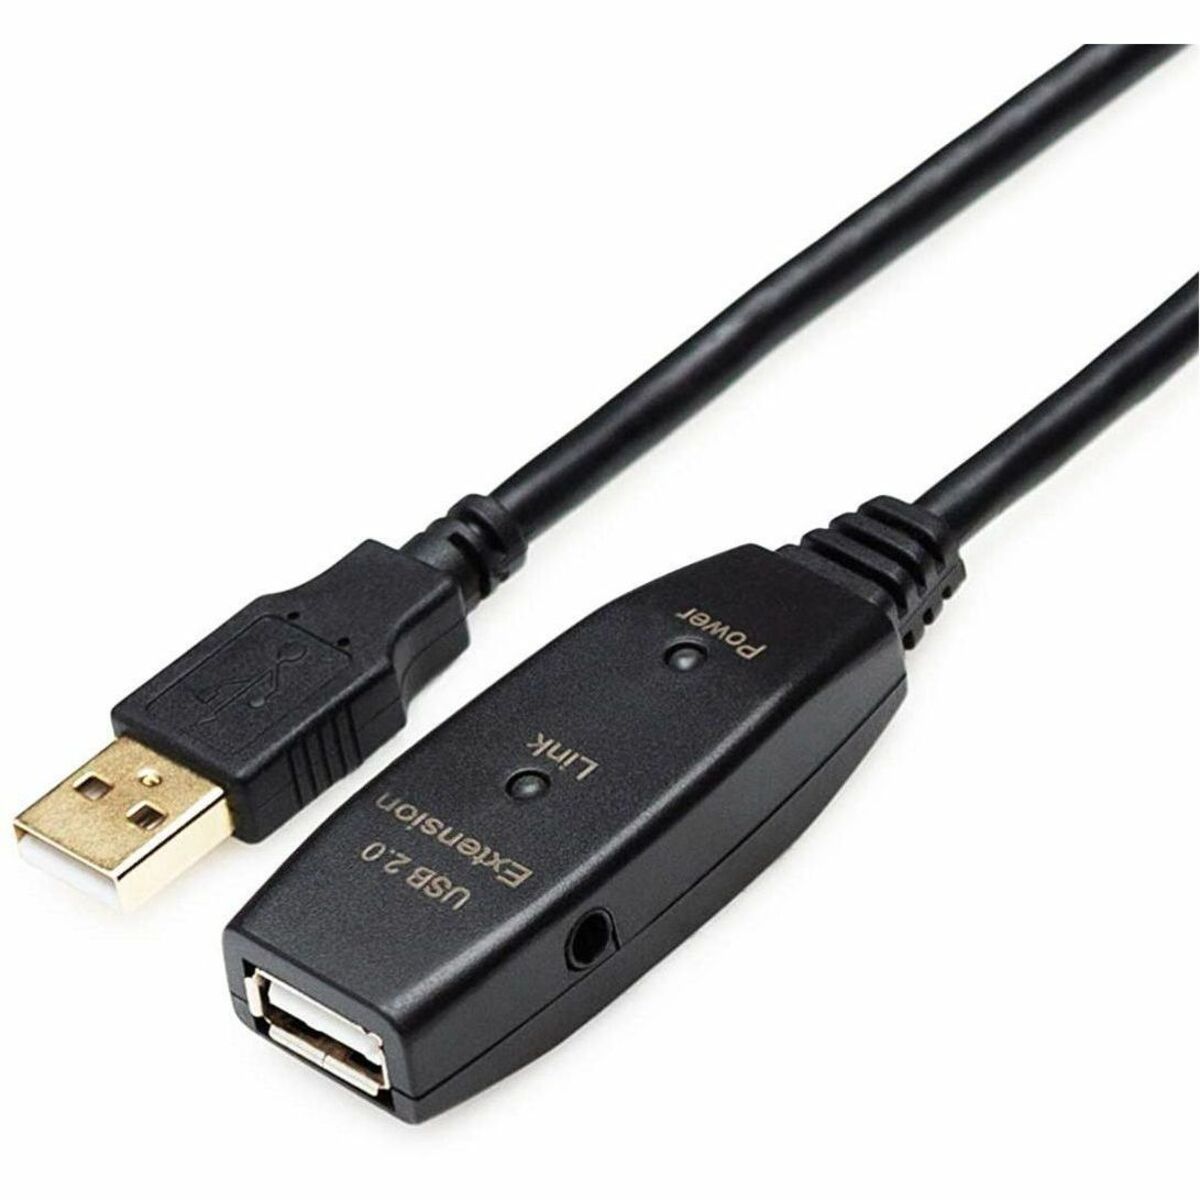 4XEM 4X3202A115M 15M USB 2.0 Active Extension Cable, Plug & Play, Signal Booster, Triple Shielded